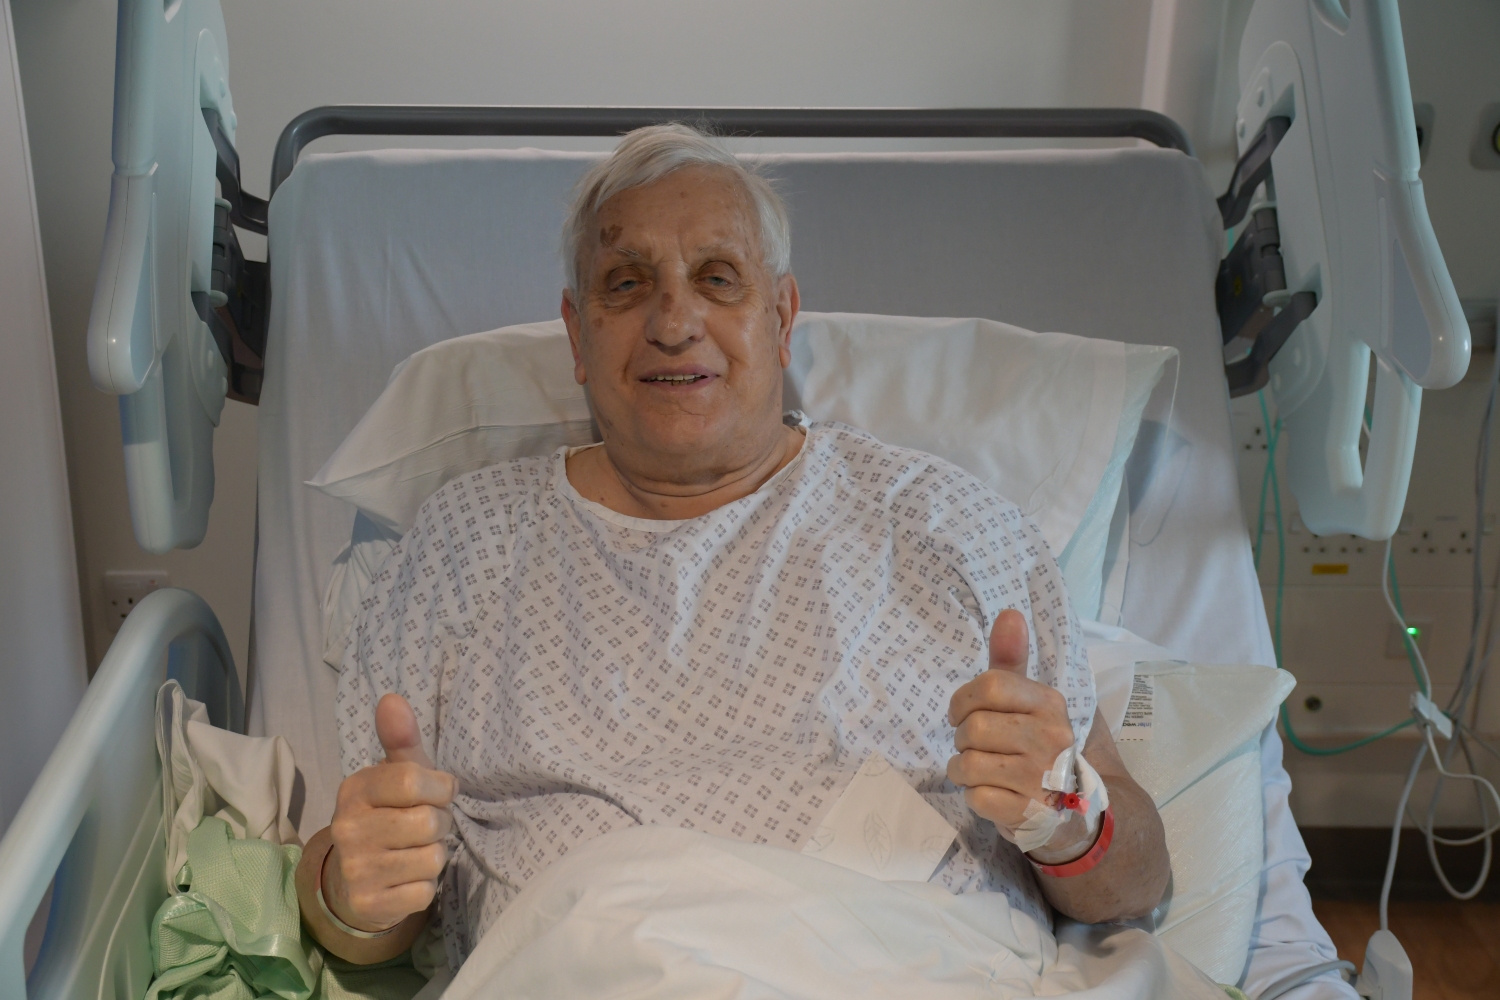 A man sitting up in a hospital bed giving a thumbs up